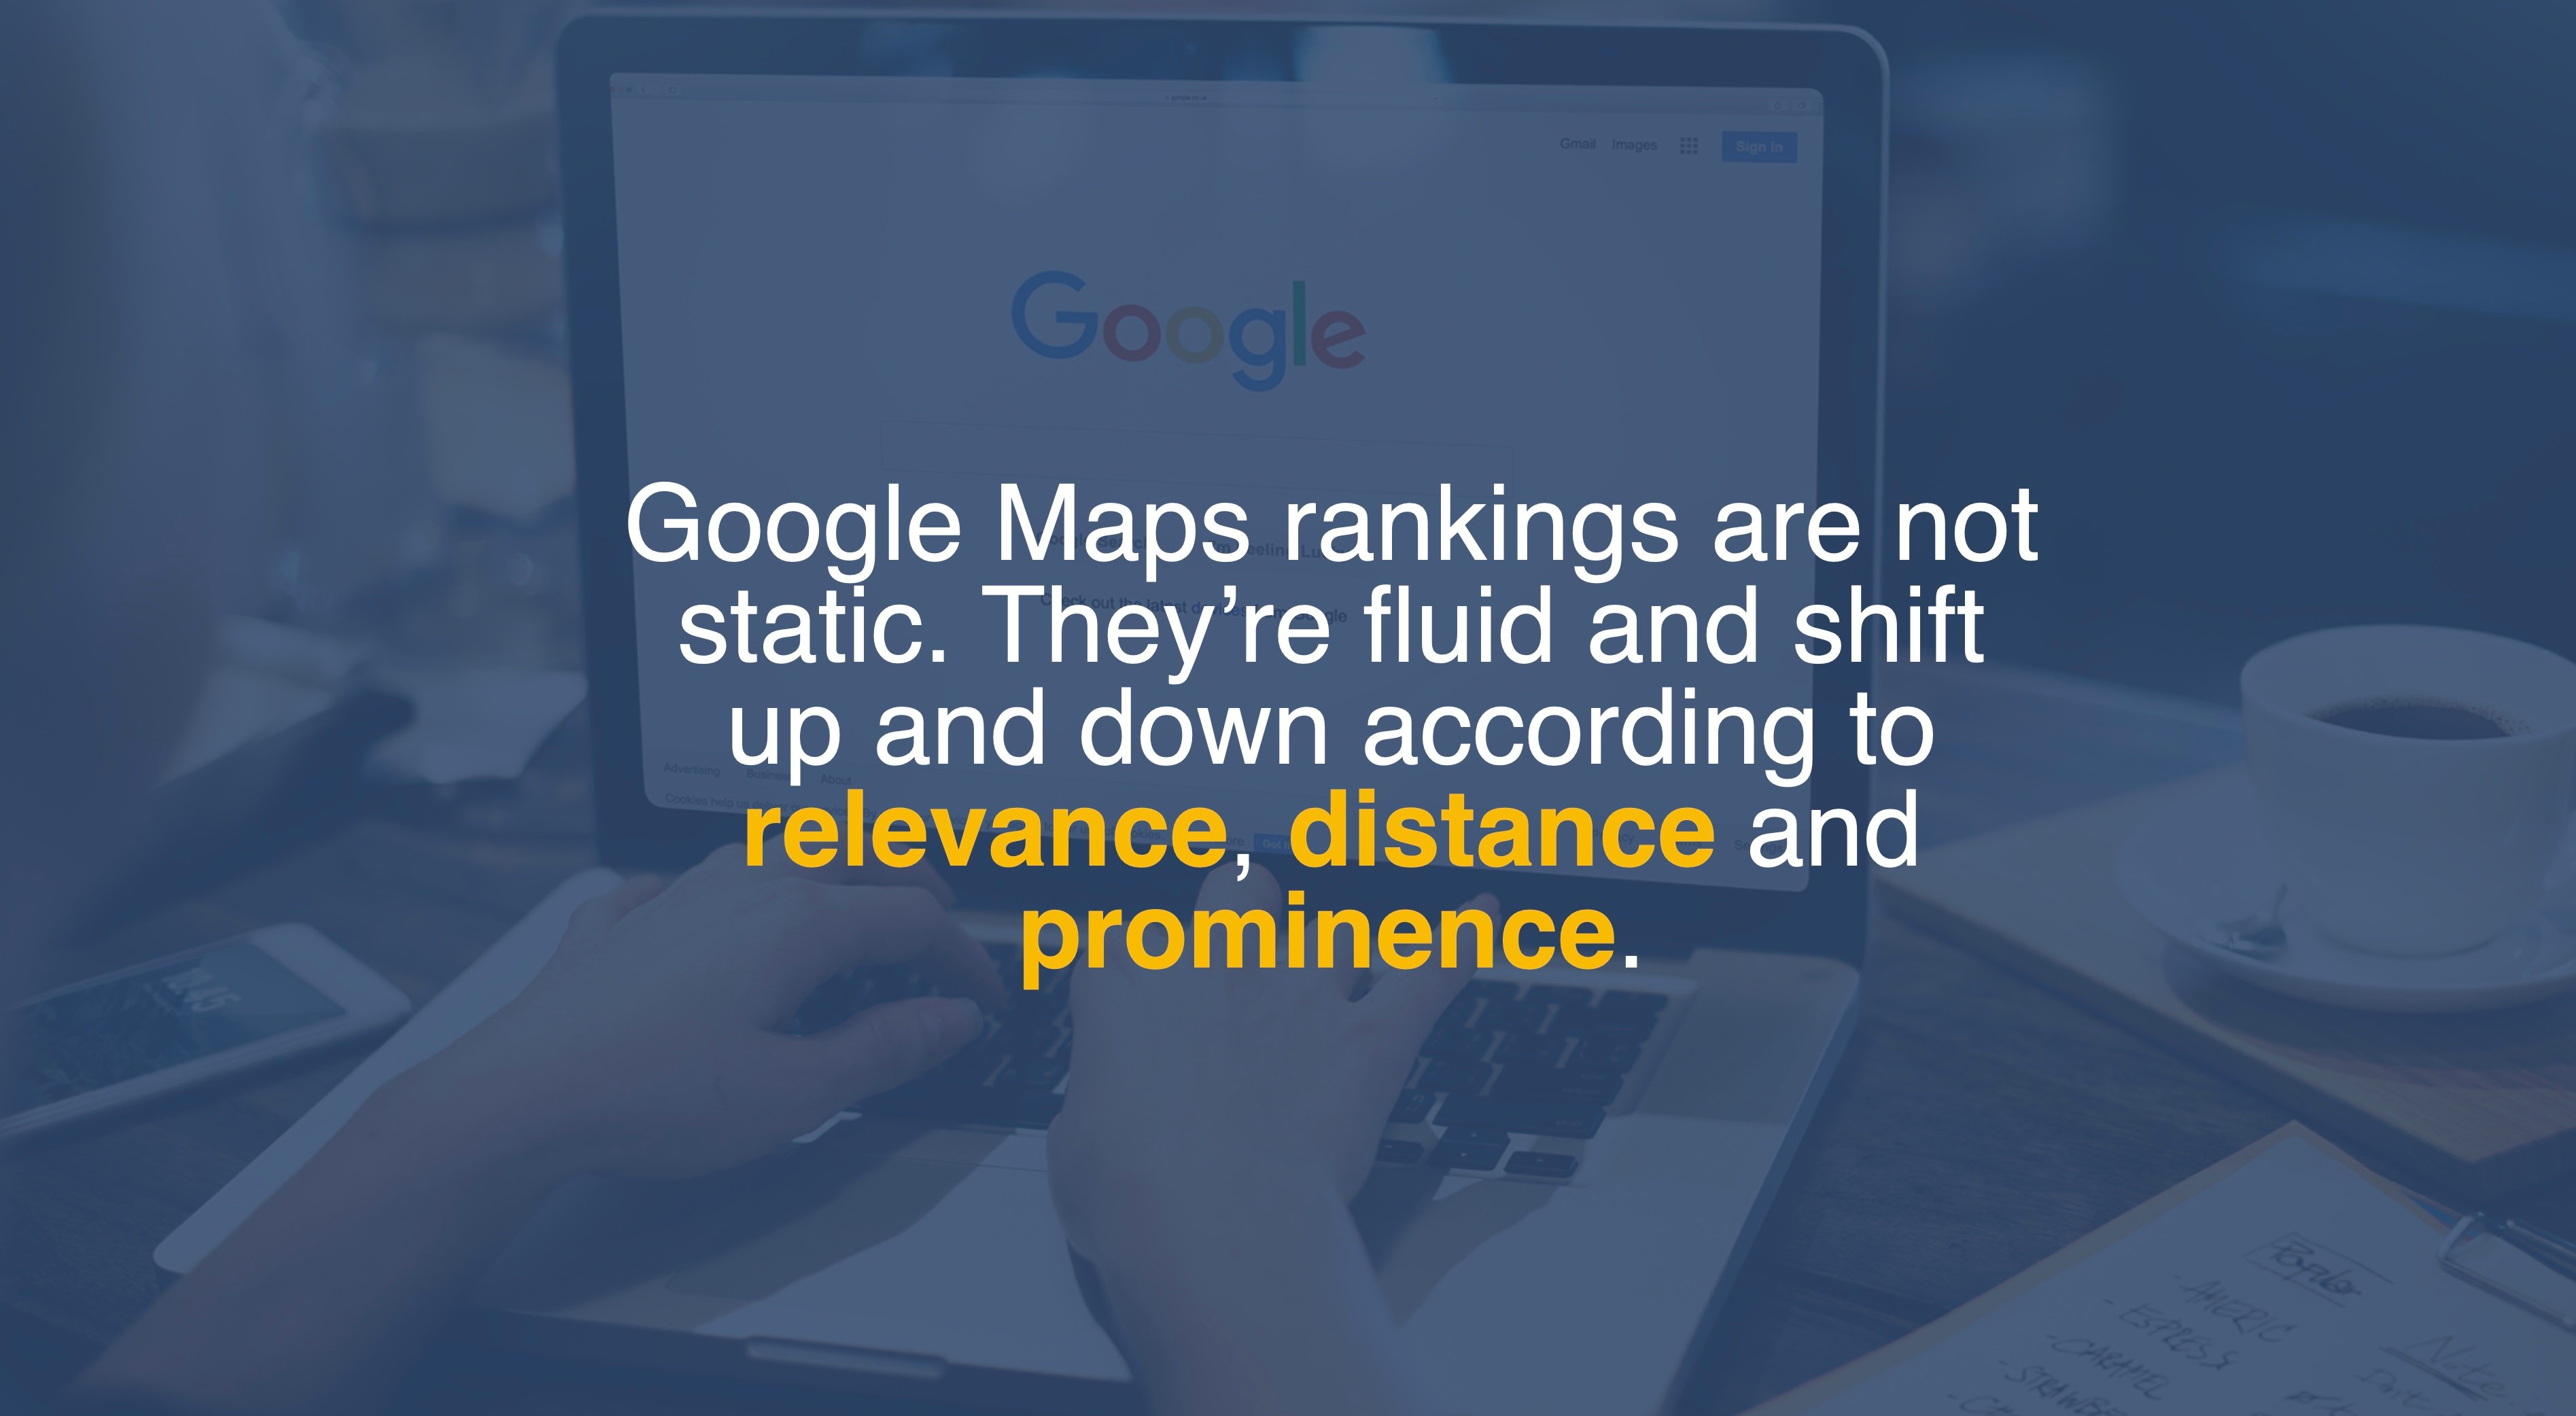 SEO for dentists_relevance-prominance-distance